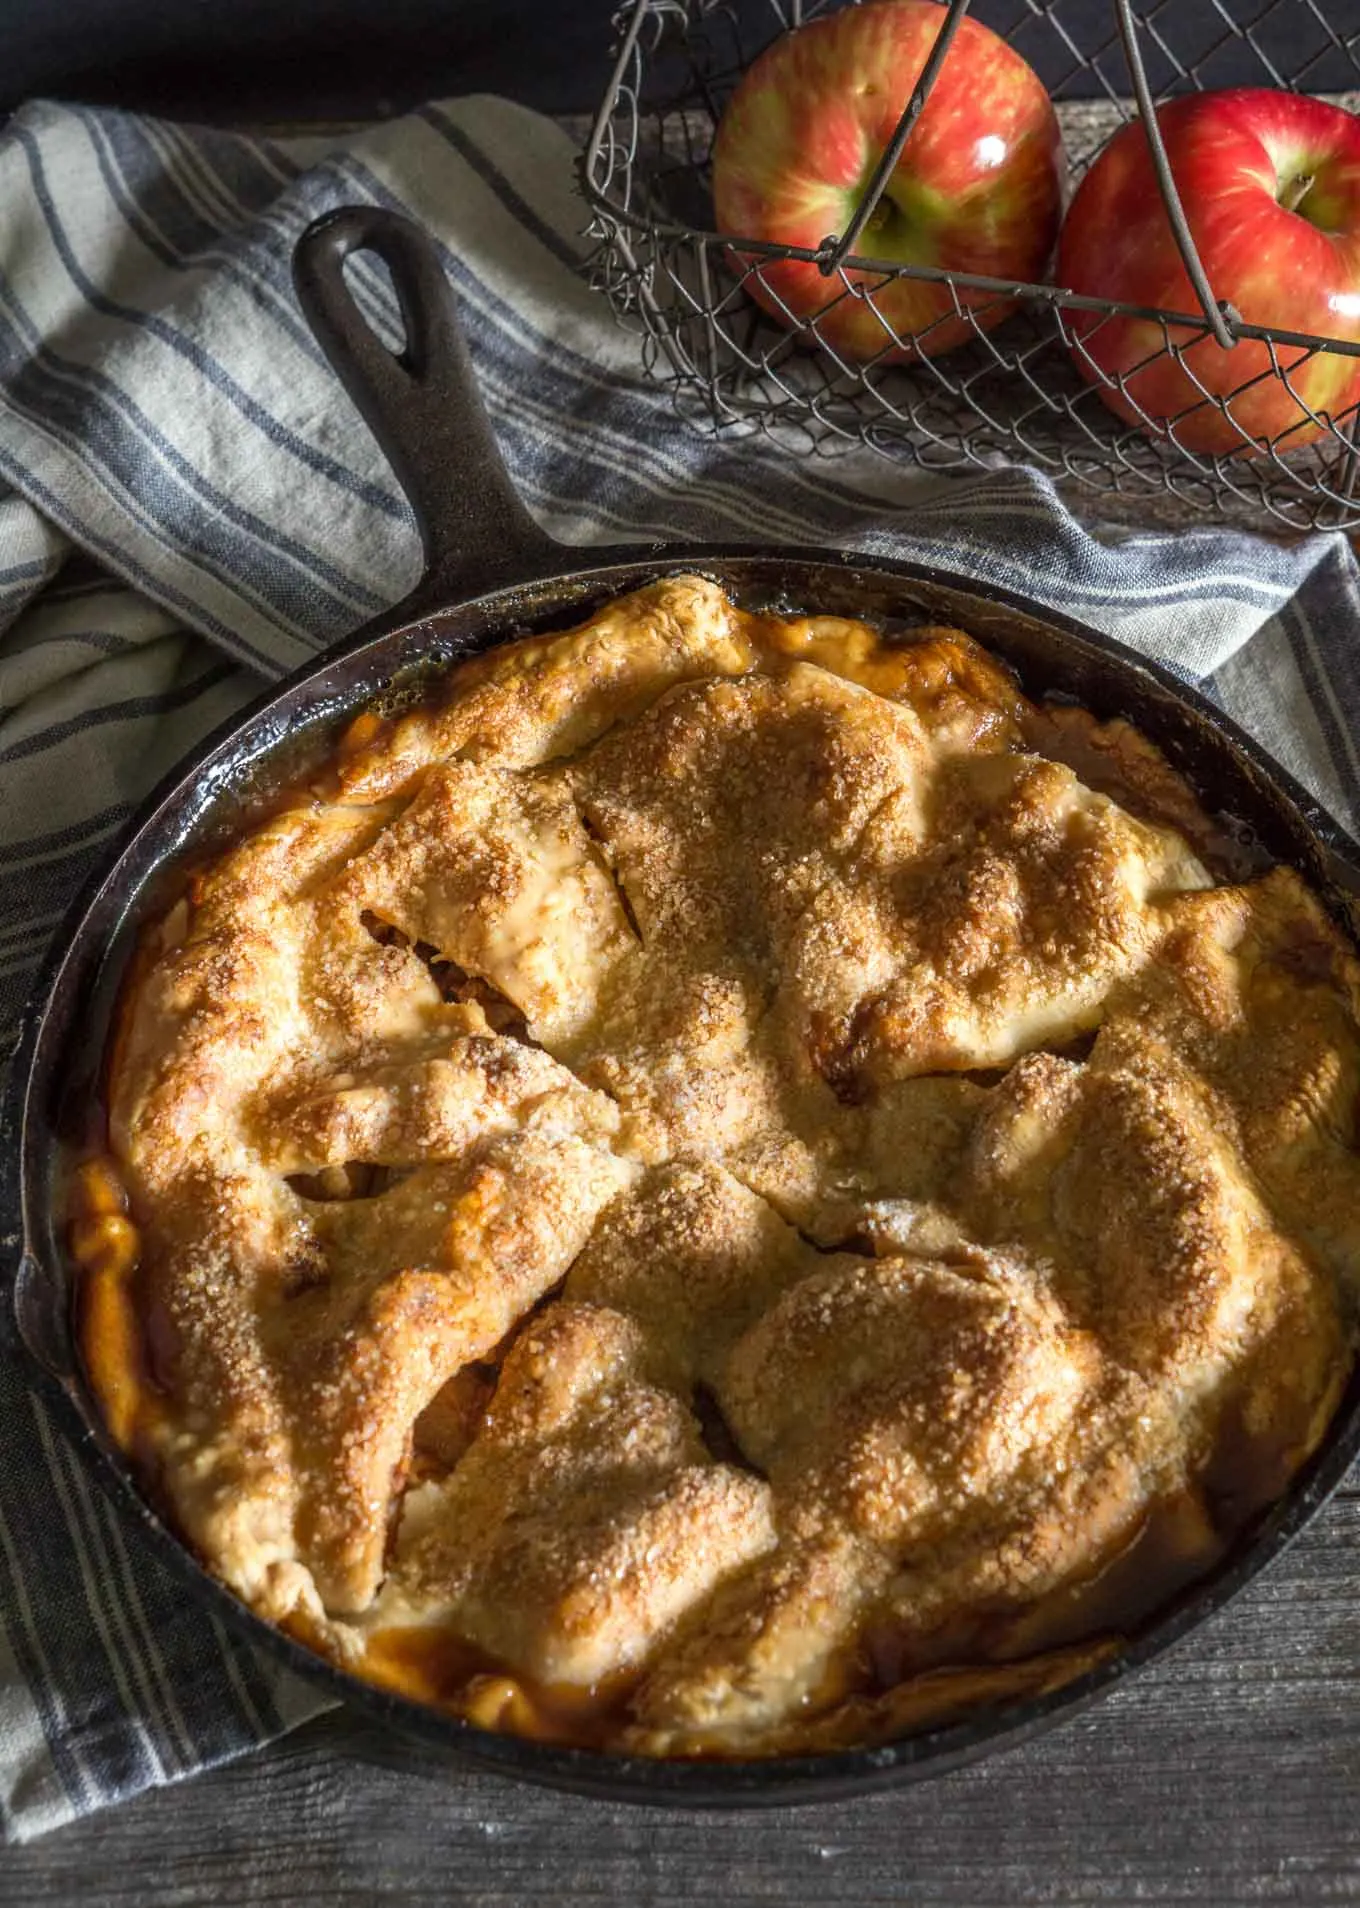 Top view of a Skillet Apple Pie in a cast iron skillet sitting in front of a basket of apples on a blue towel covering a rustic wood background.